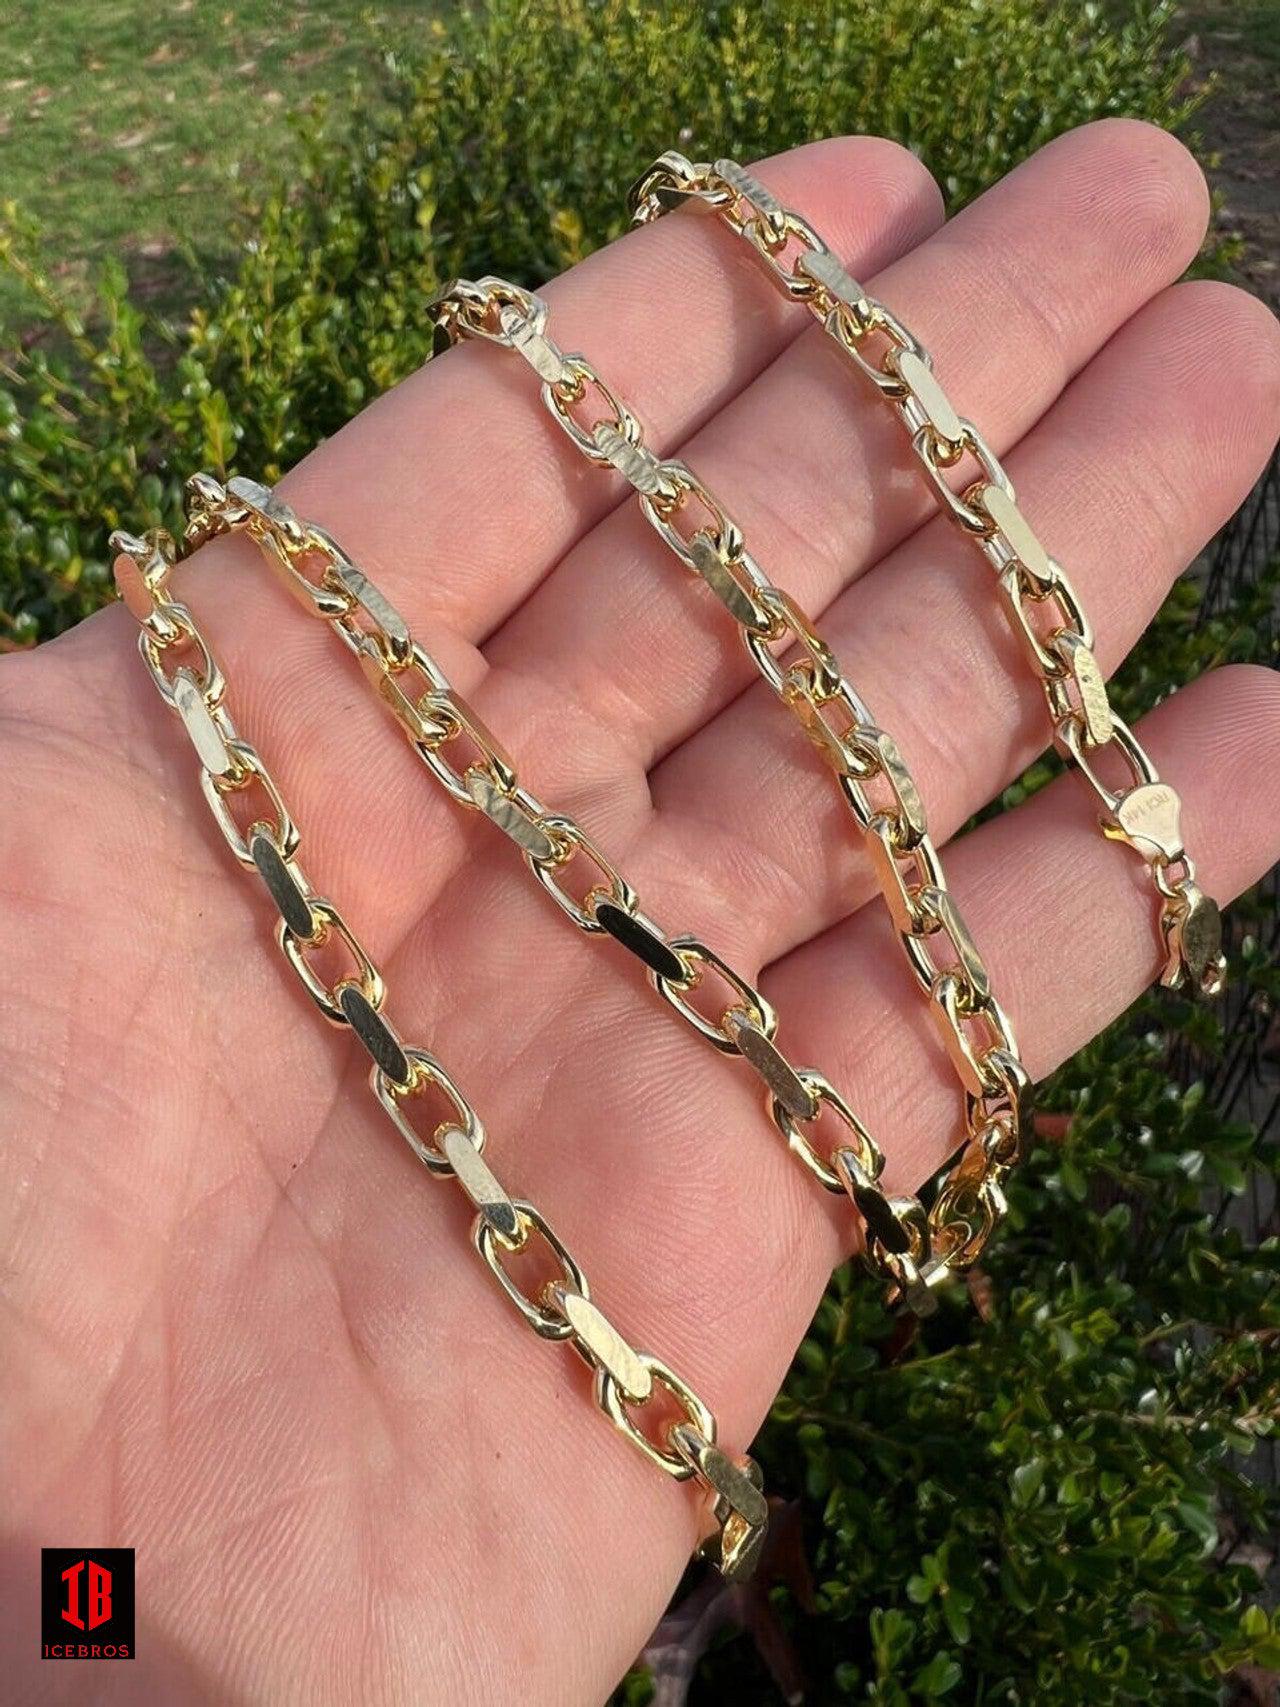 14K Yellow Gold Solid Diamond Cut Rope Chain | LoveBling 5mm / 24 / No